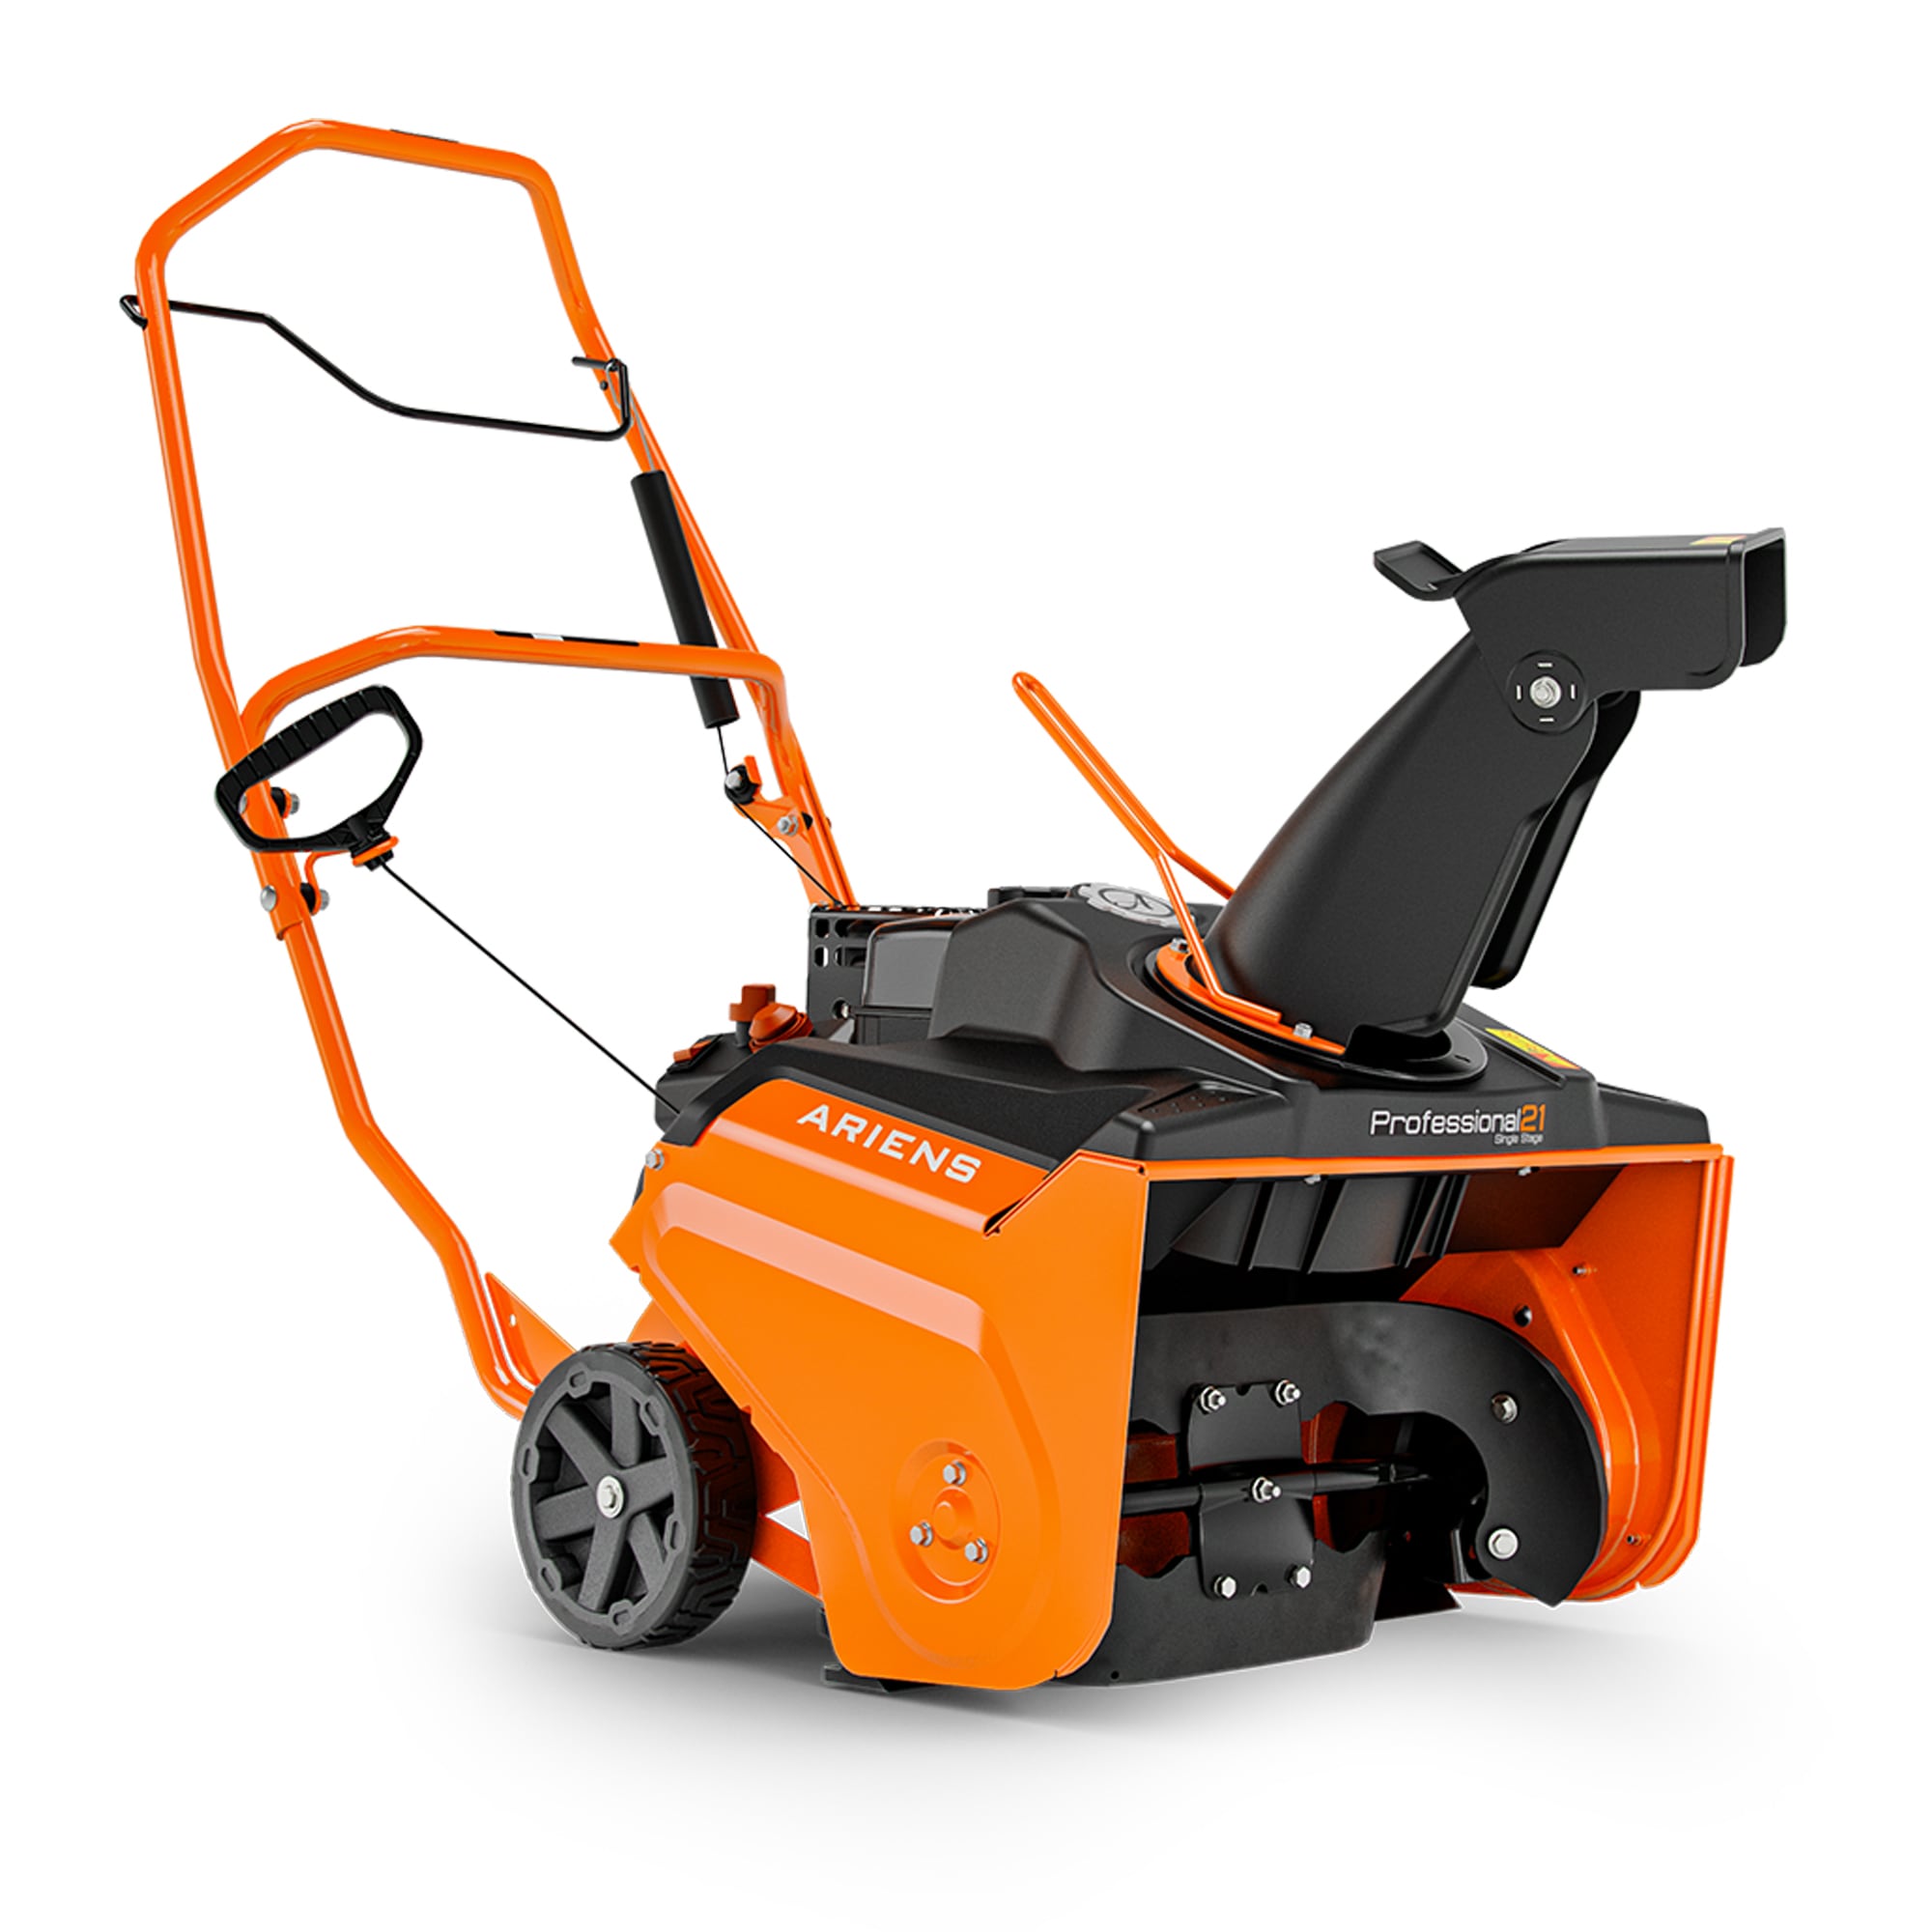 Replacement Parts for Lawn Mowers and Snow Blowers - Ariens